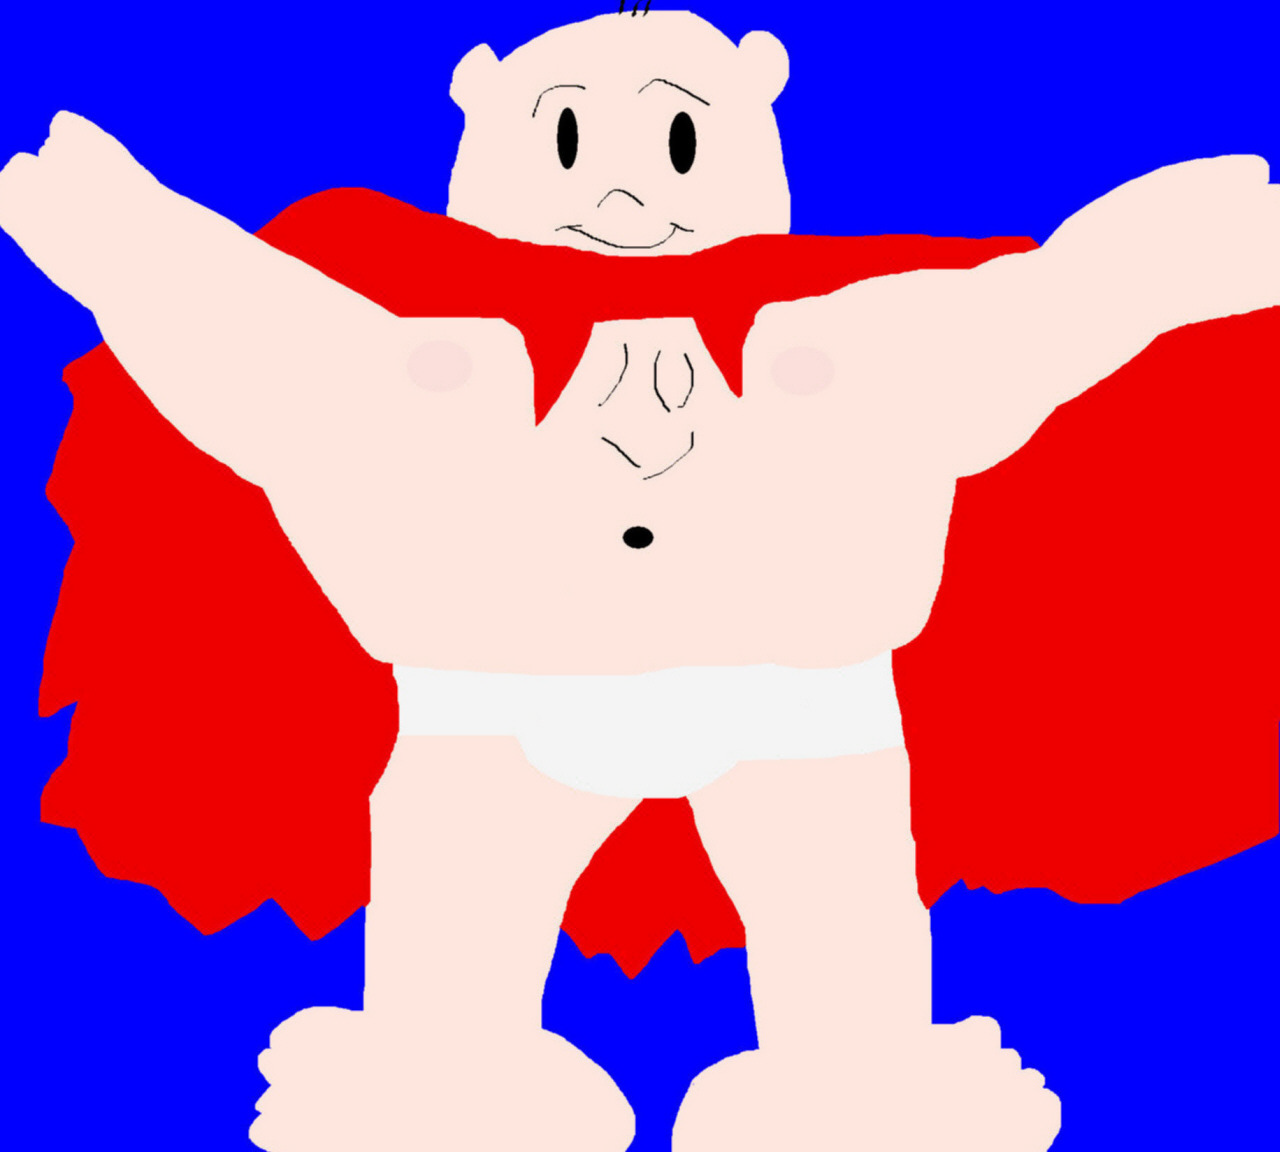 Captain Underpants MS Paint Gift For Rogerbibby by Falconlobo